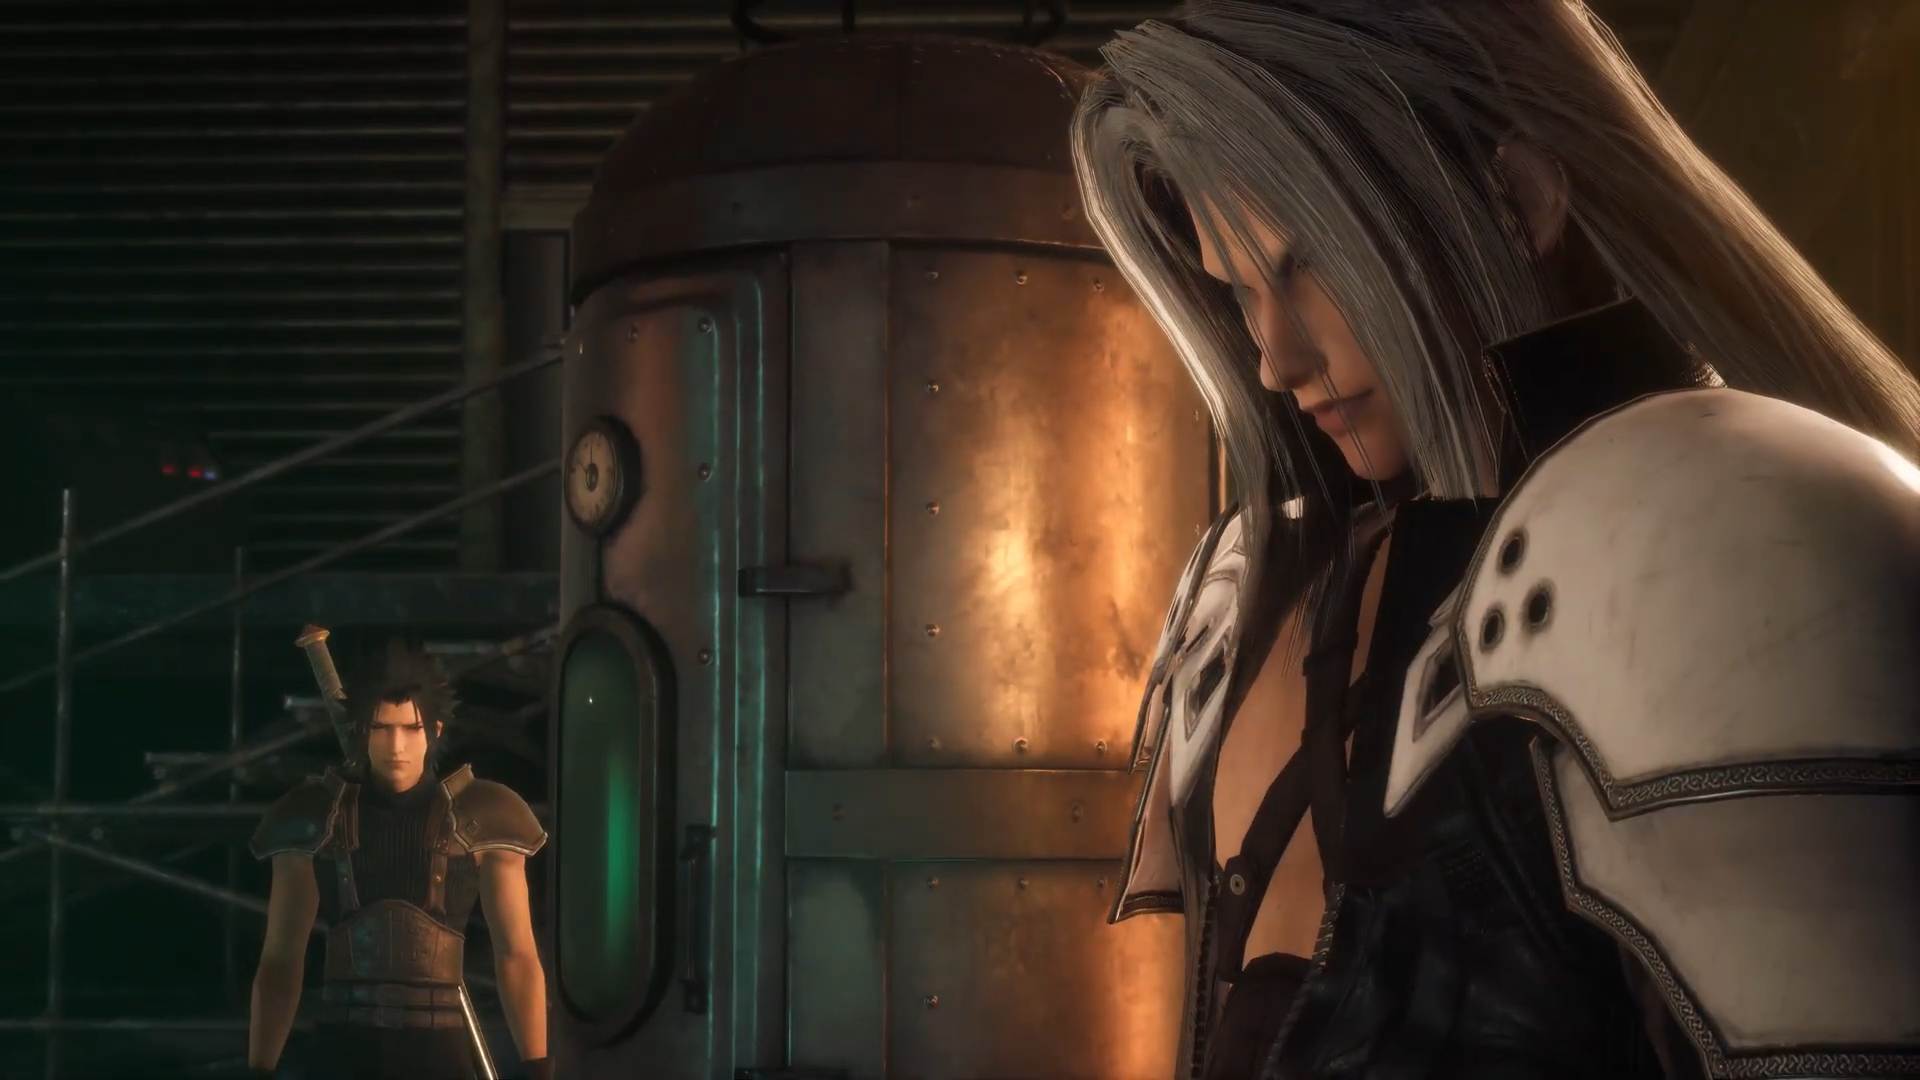 Crisis Core remaster part of the FF7 Remake project, producer says - Polygon